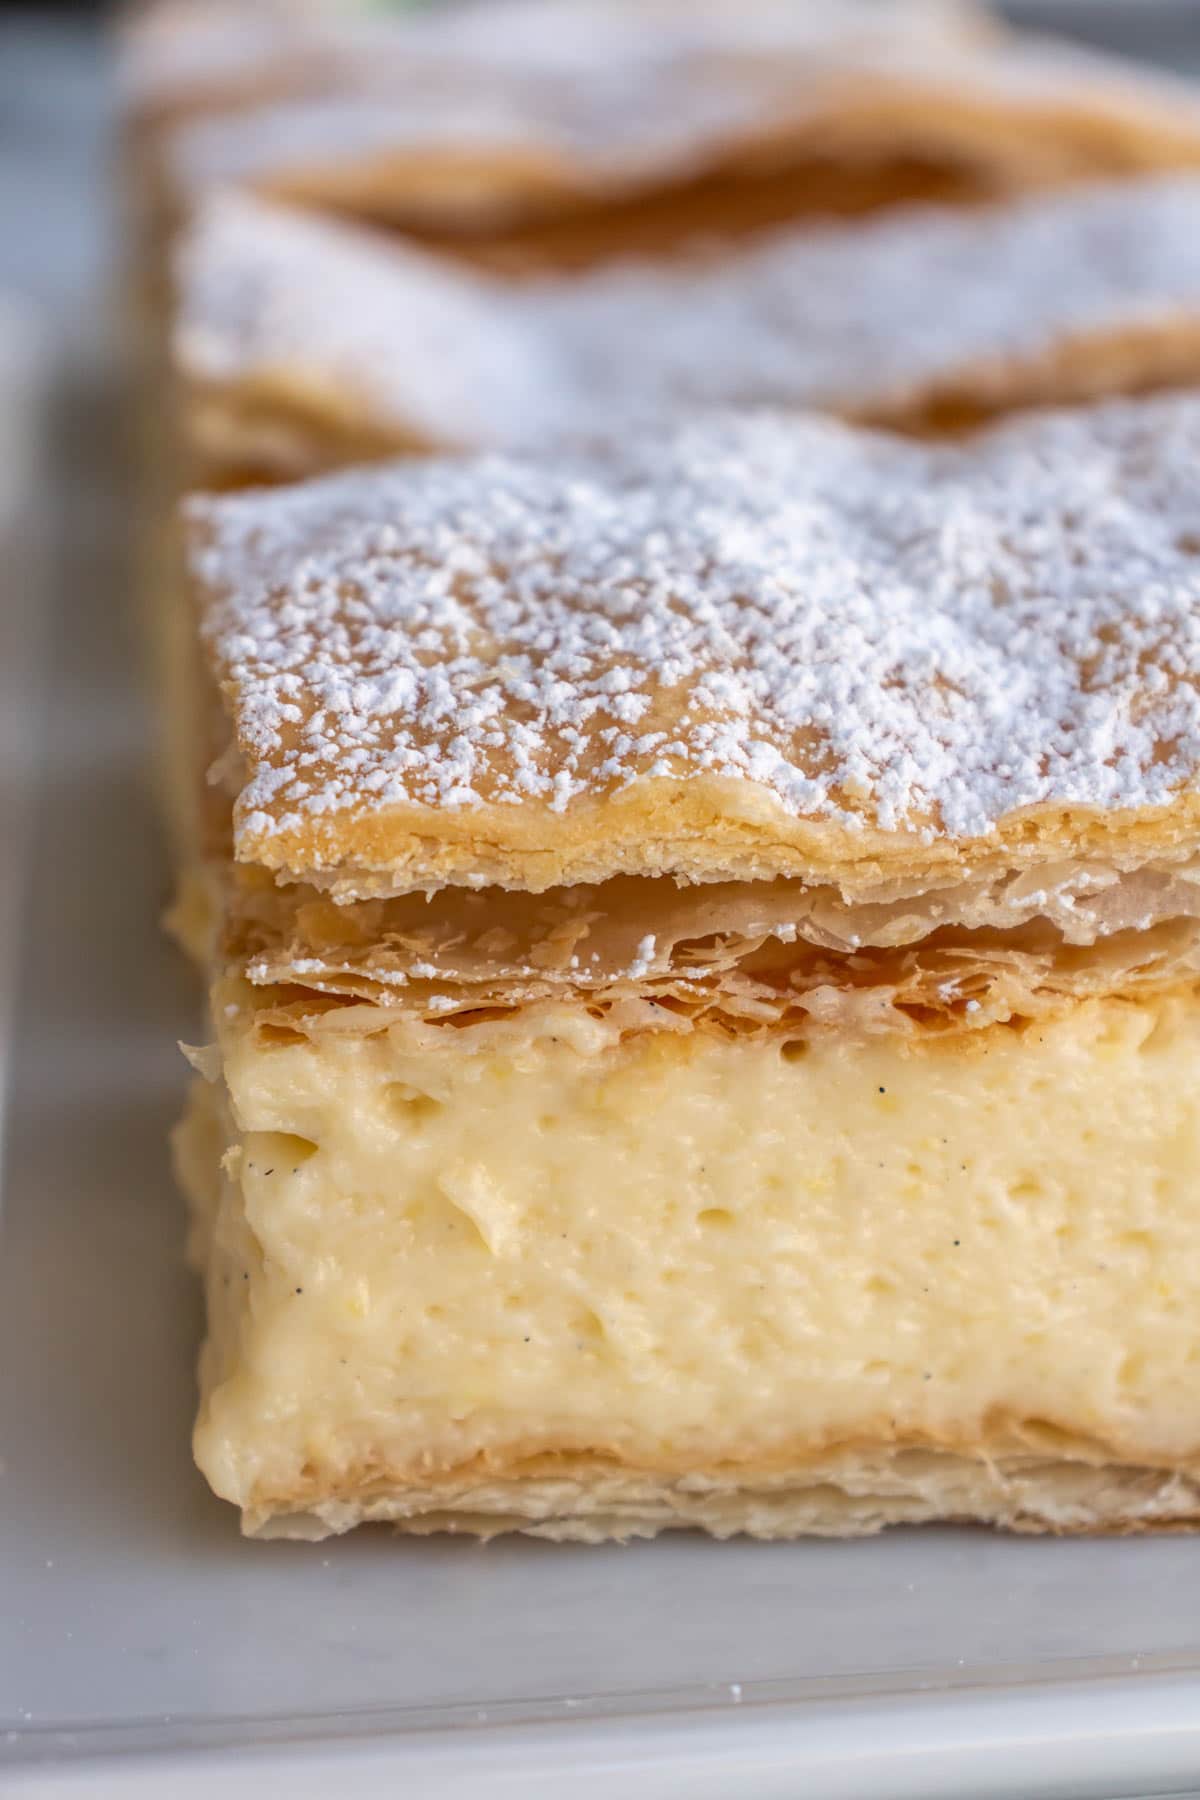 Closeup of a row of Austrian cream slices (cremeschnitte) on a white plate.